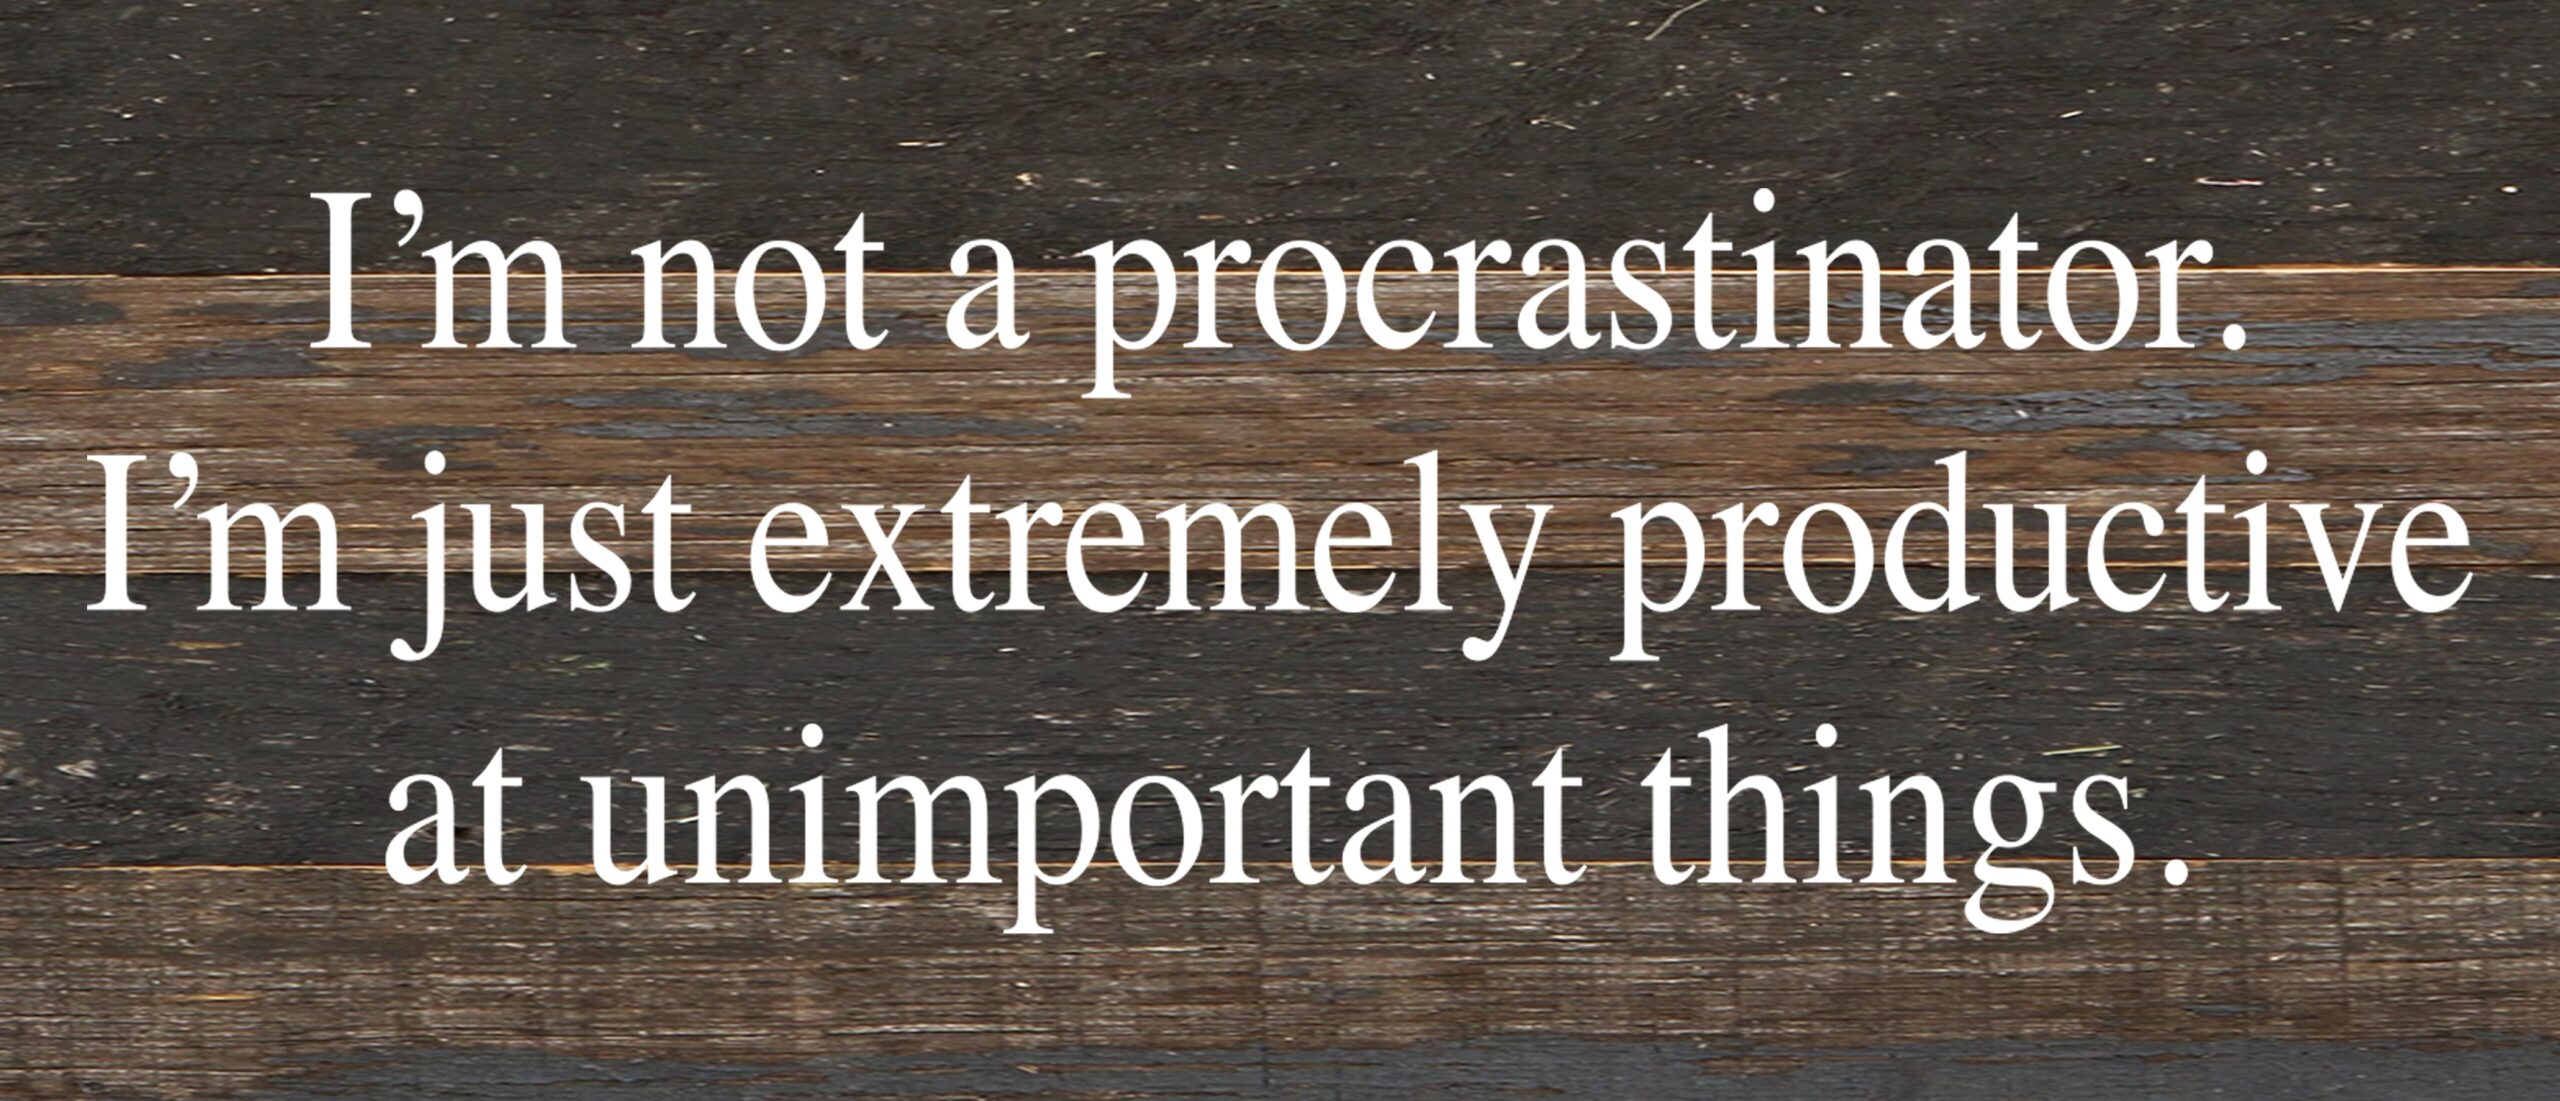 I'm not a procrastinator. I'm just extremely productive at unimportant things. / 14"x6" Reclaimed Wood Sign